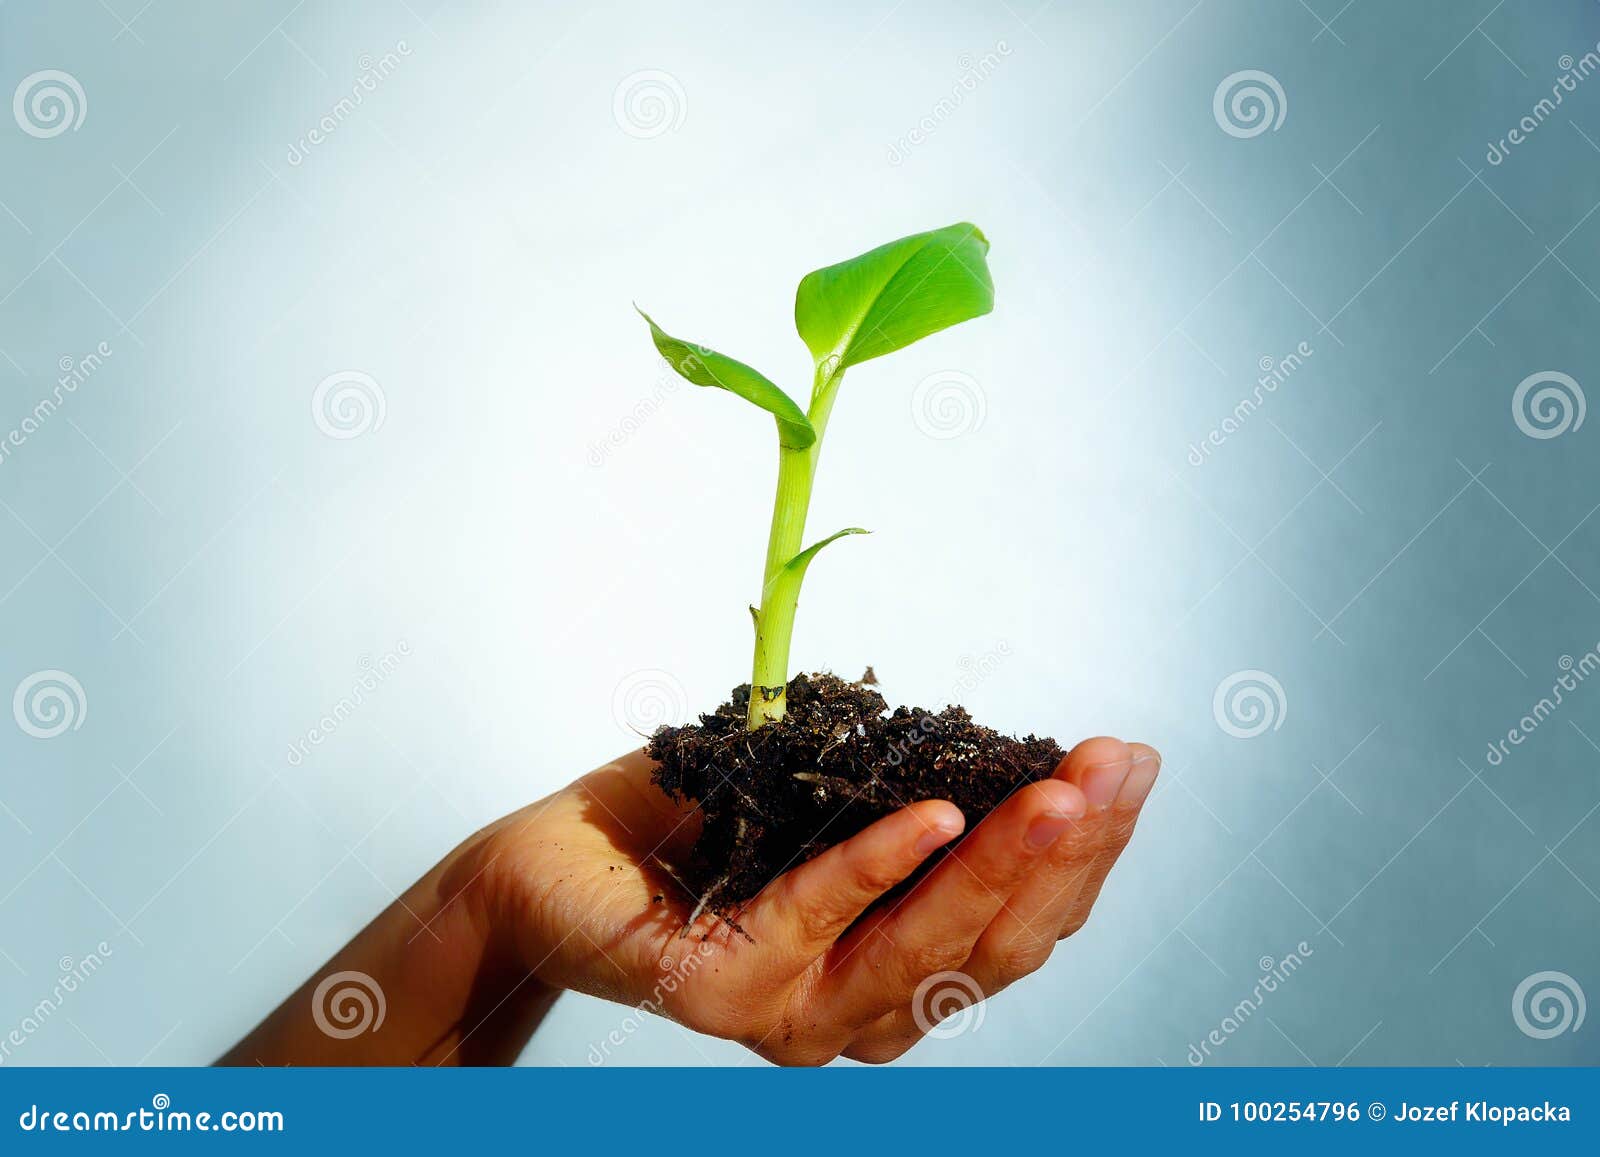 hand and plant. enviroment concept. blur background.